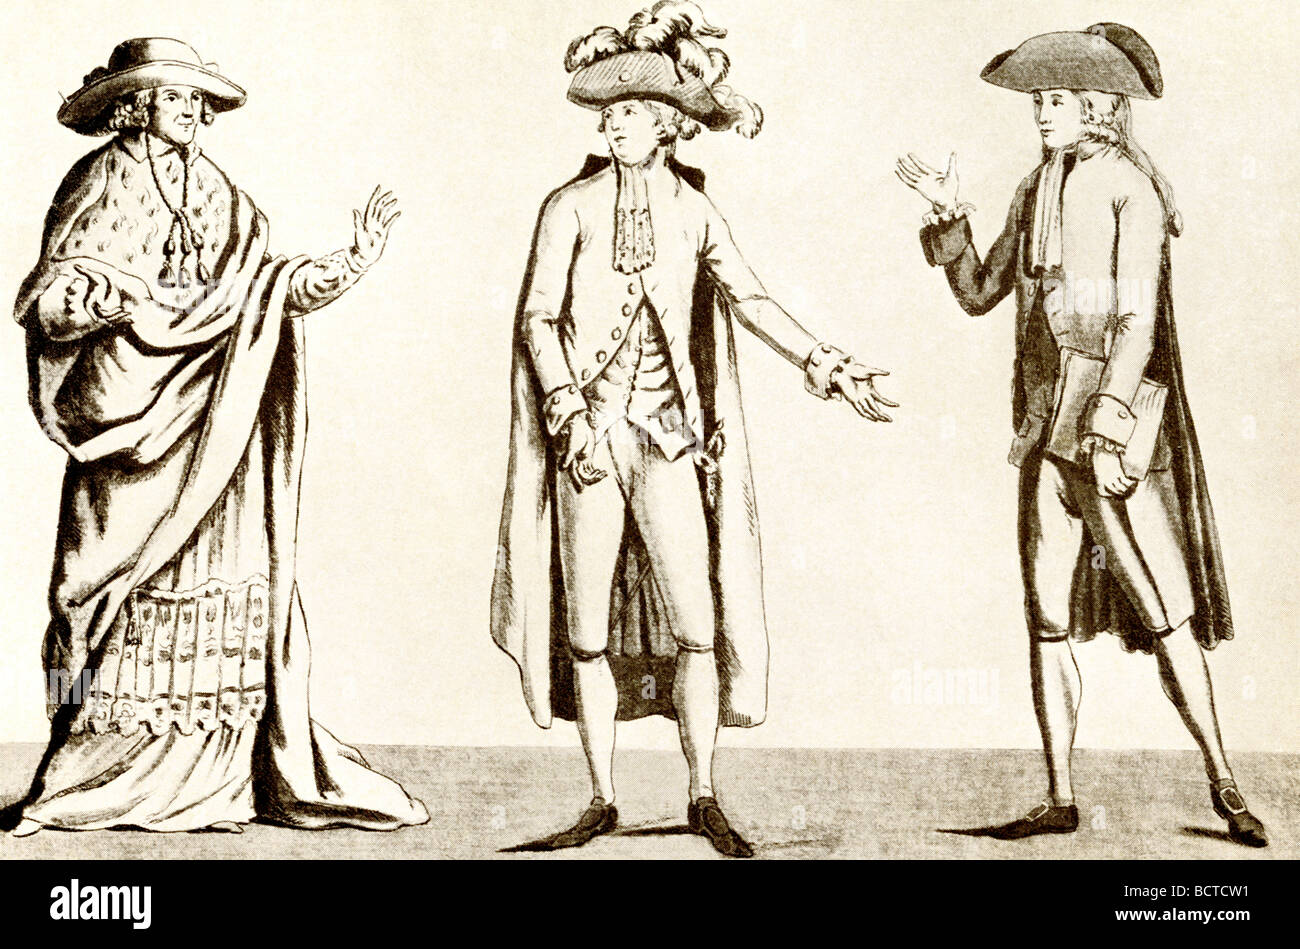 Ceremonial Costume of The Three Orders (clergy, nobility, commons)  in the National Assembly during the French Revolution (1789 -1799). Stock Photo